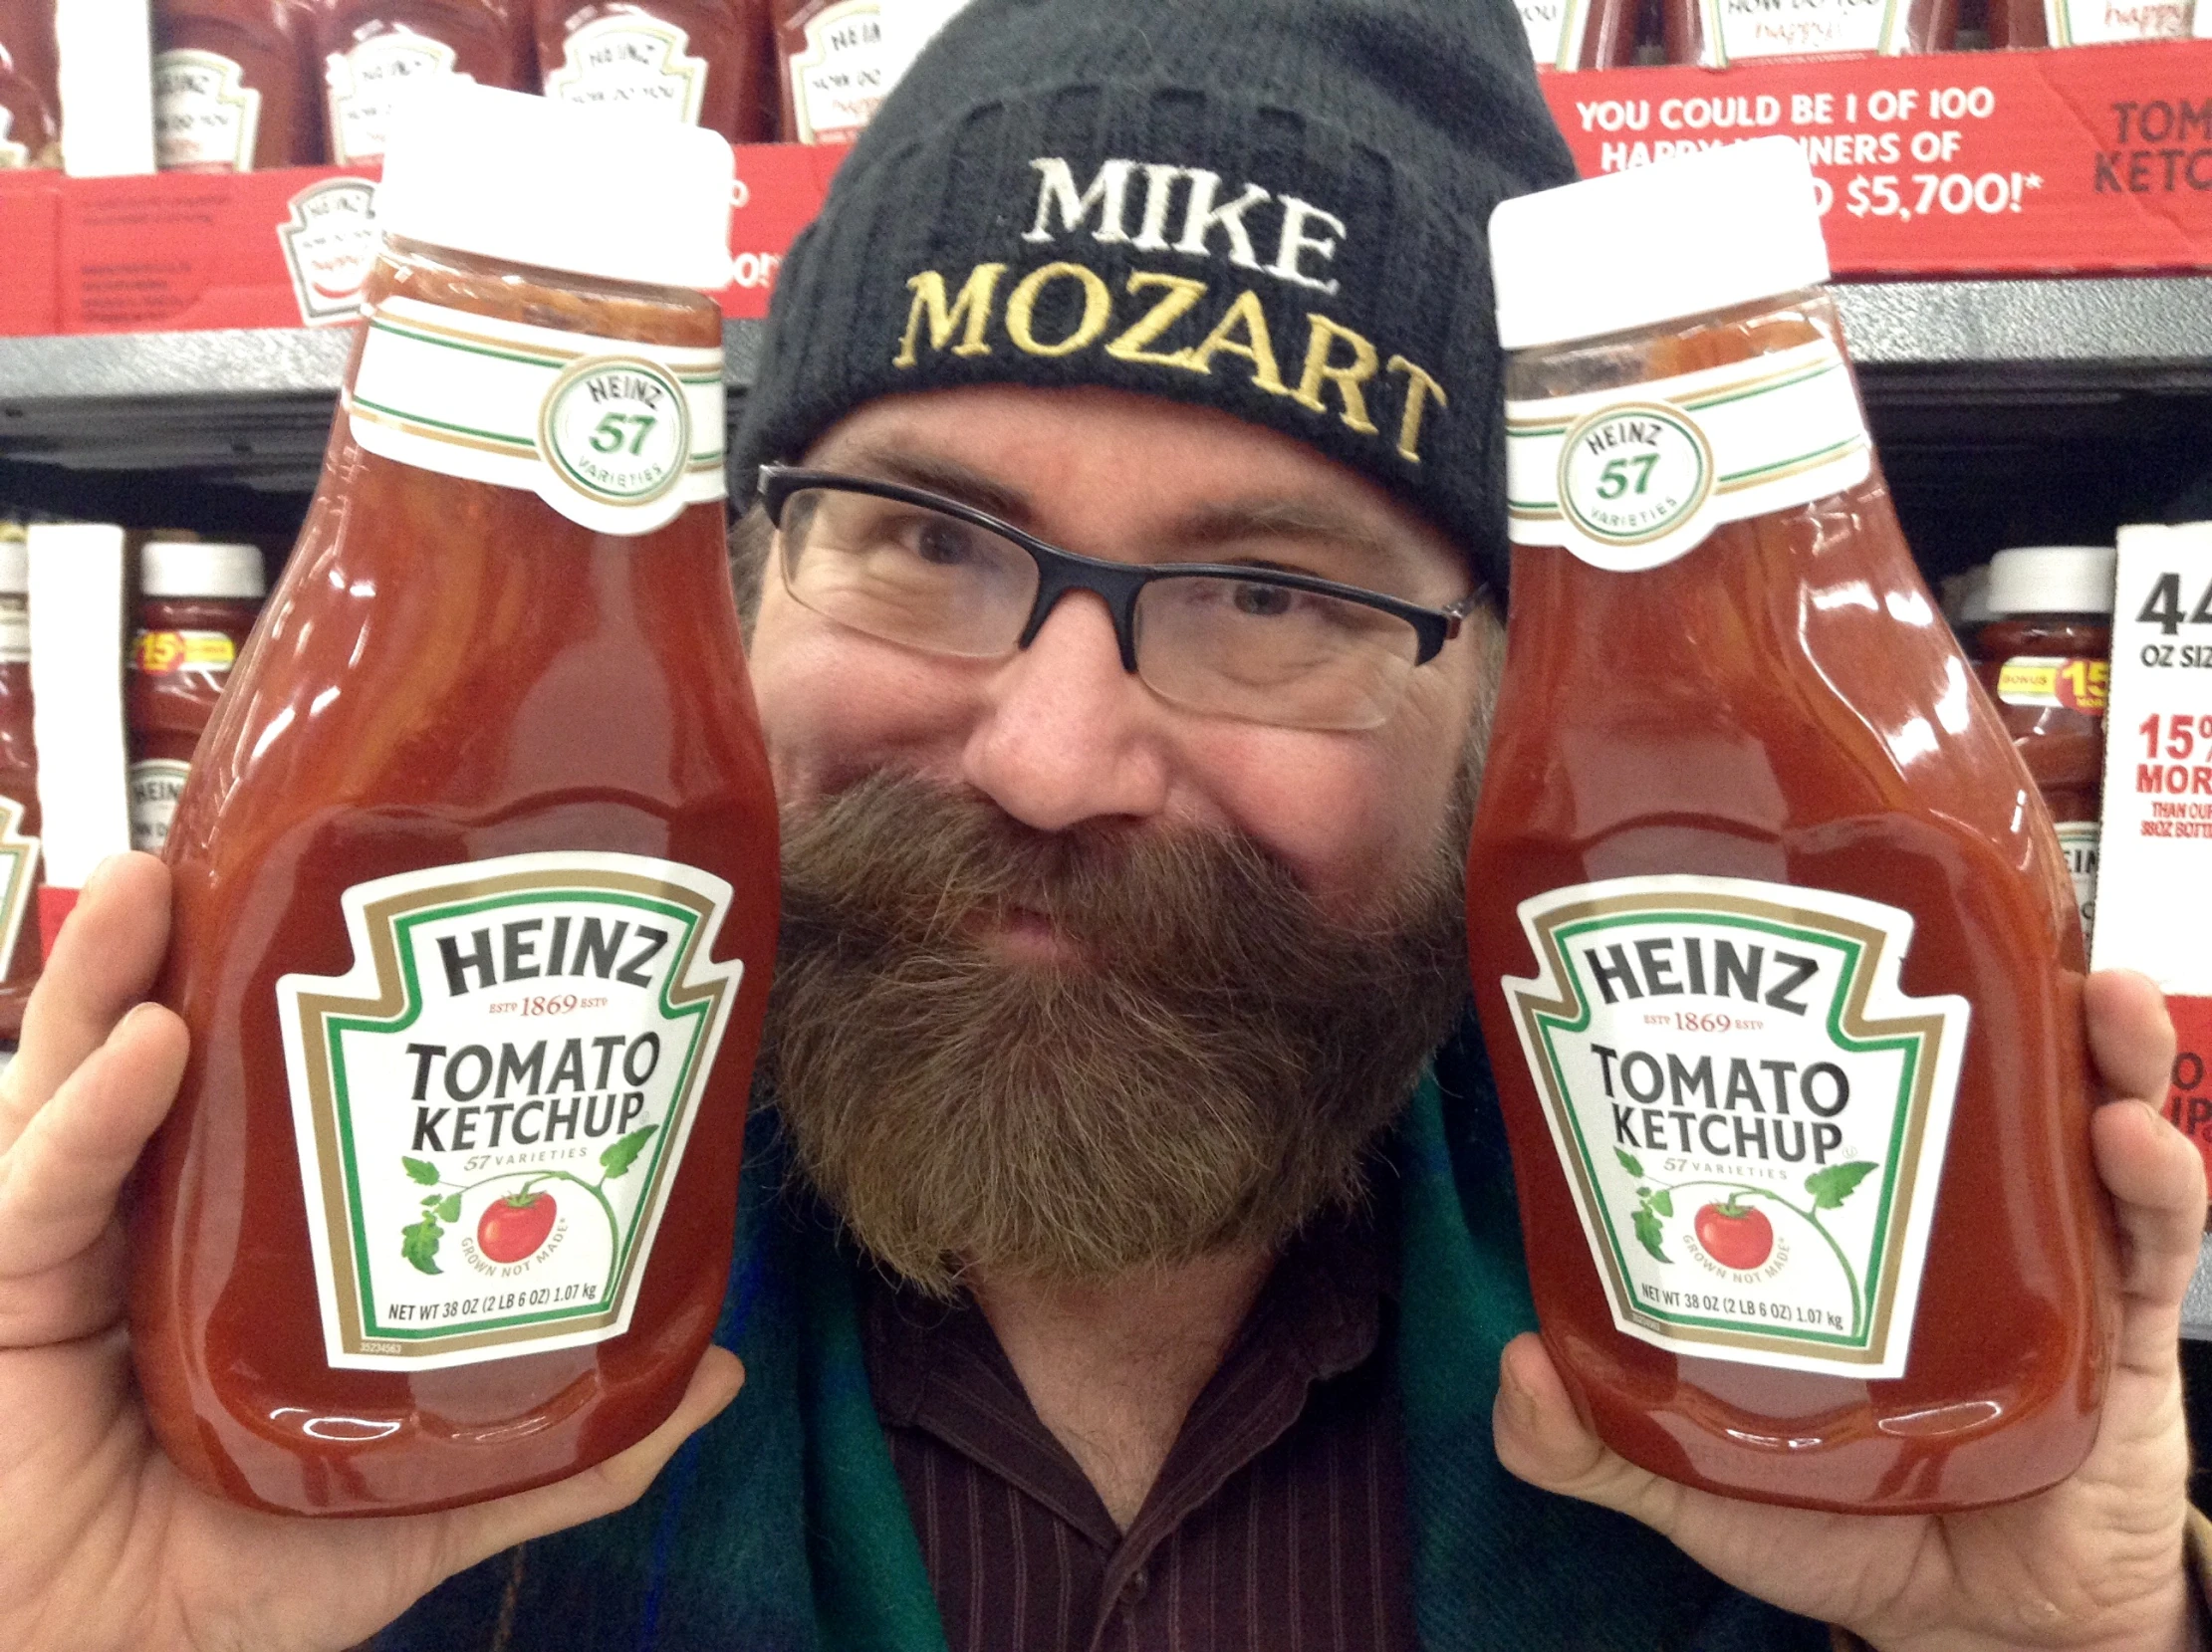 a man standing inside a store holding two jars of heinz's tomato ketchup